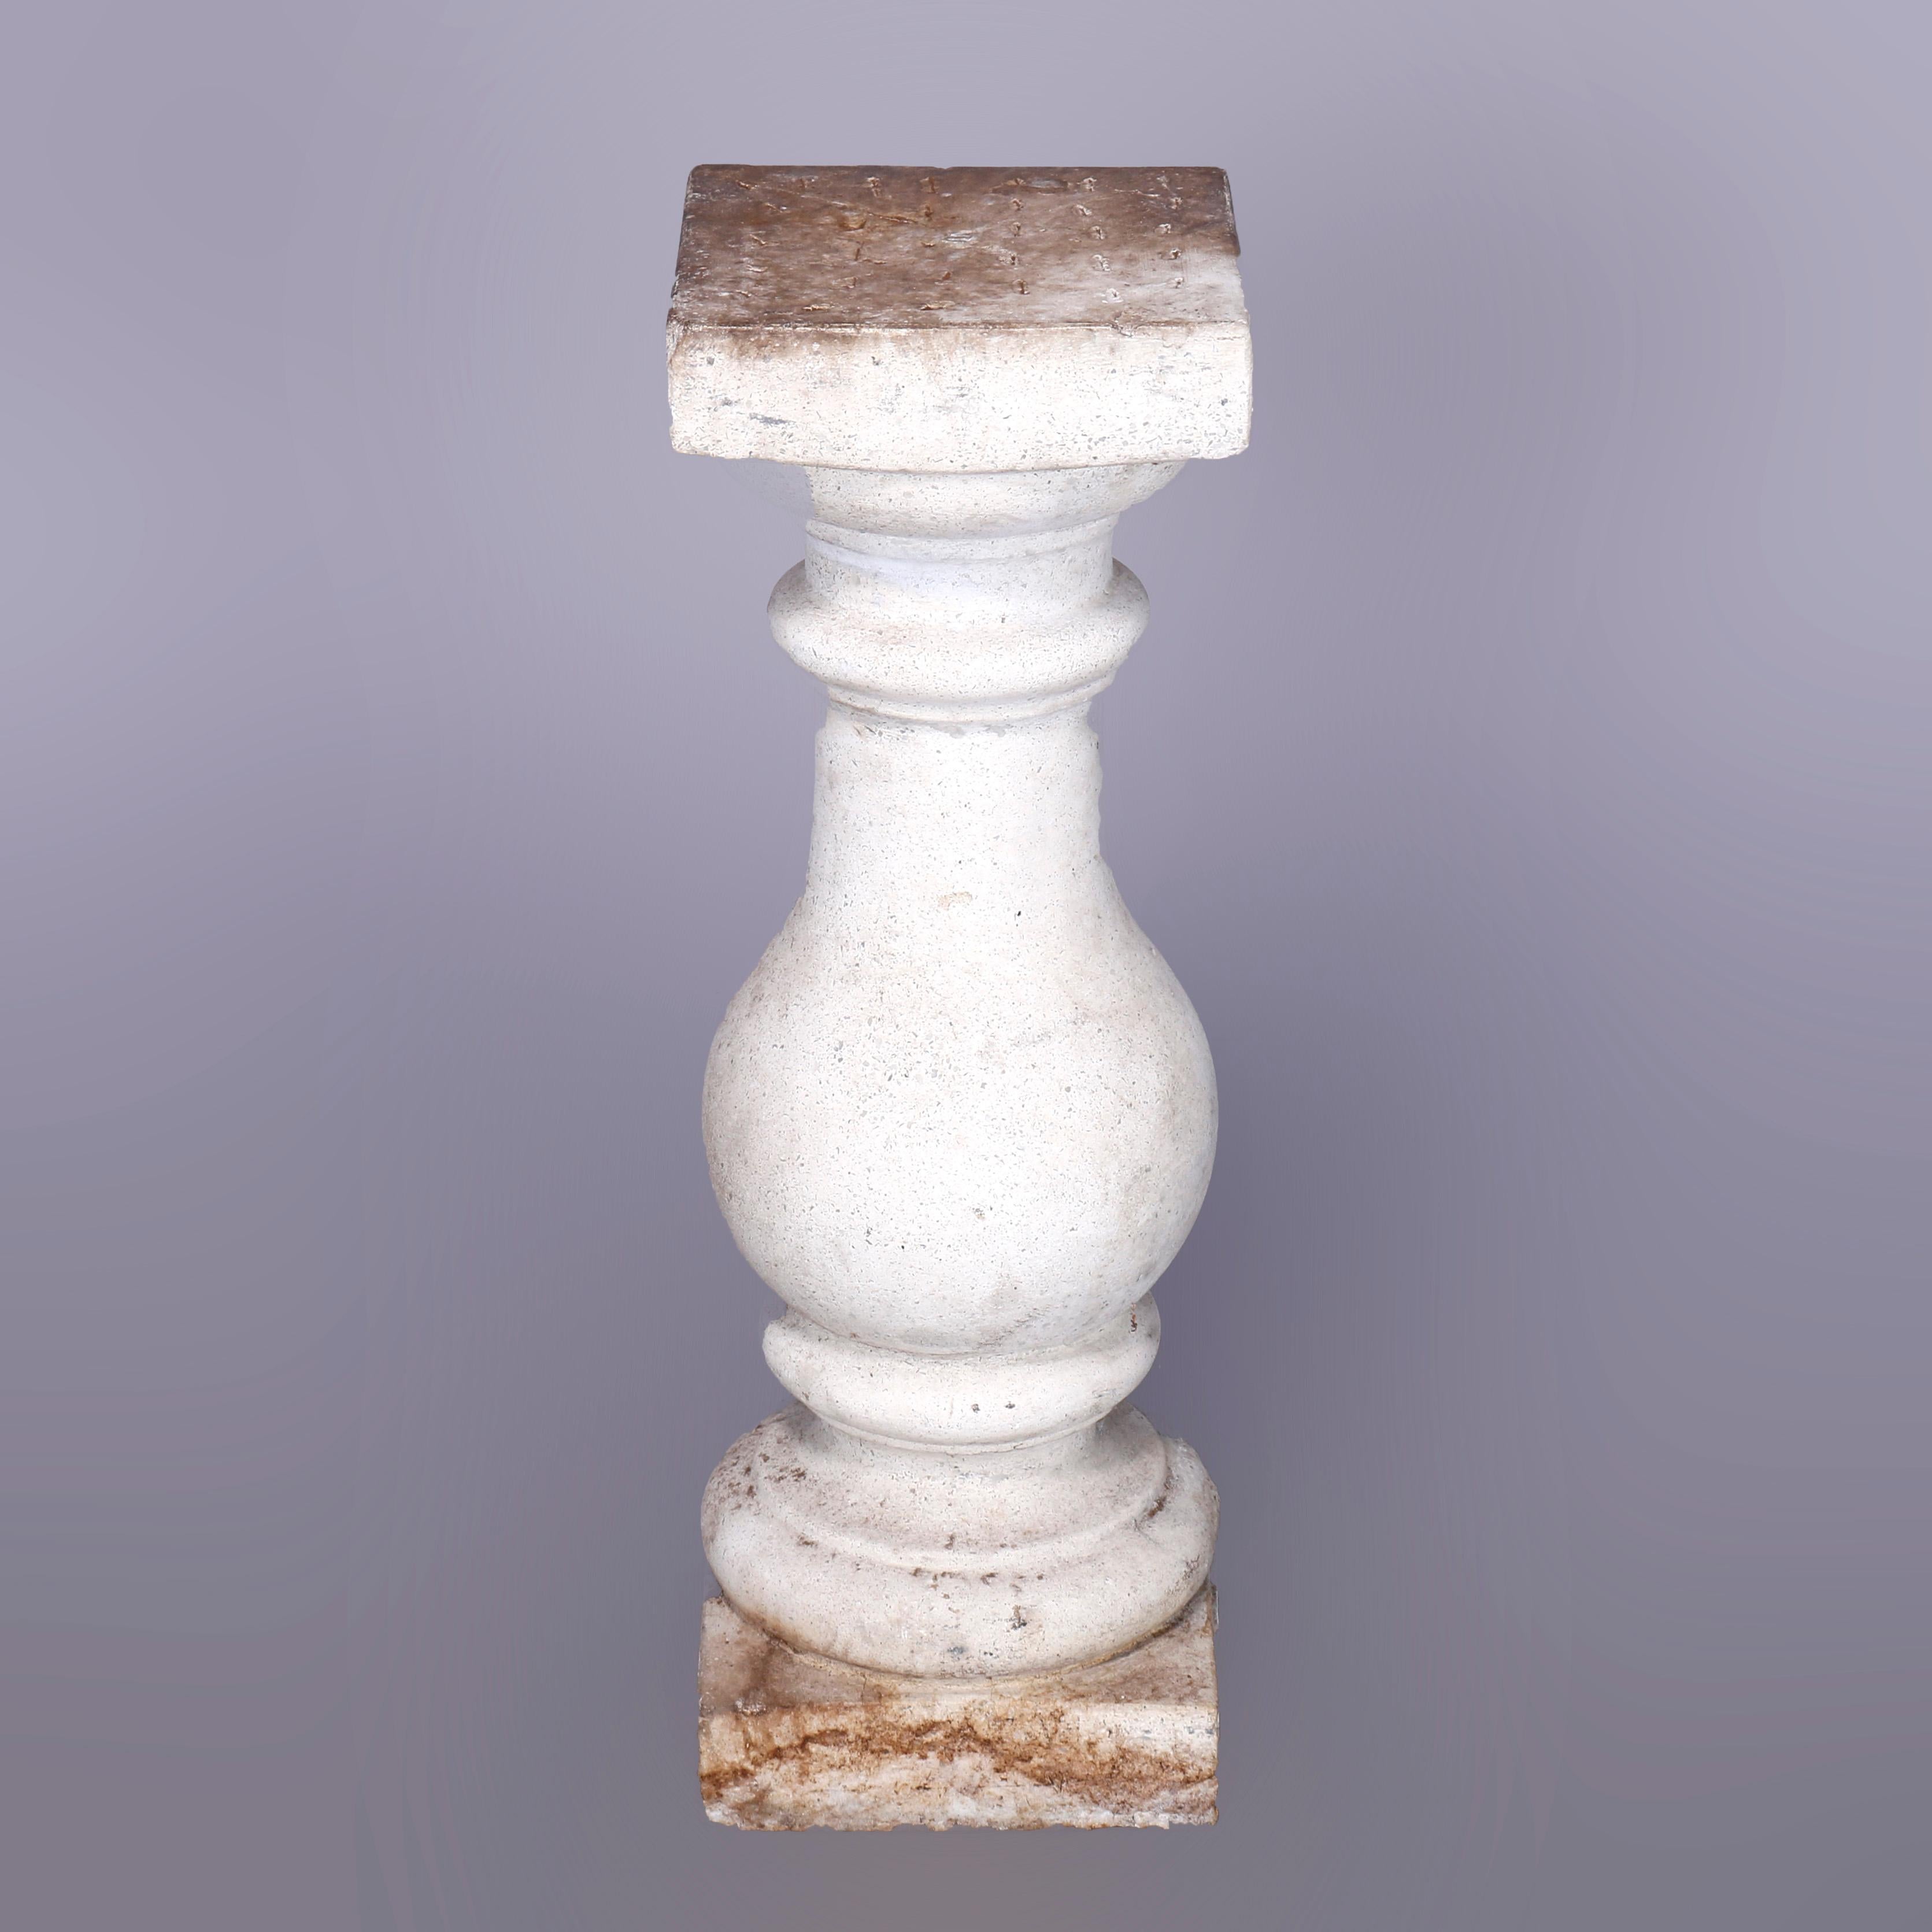 American Classical Cast Hard Stone Balustrade Sculpture or Plant Display Pedestal 20th C For Sale